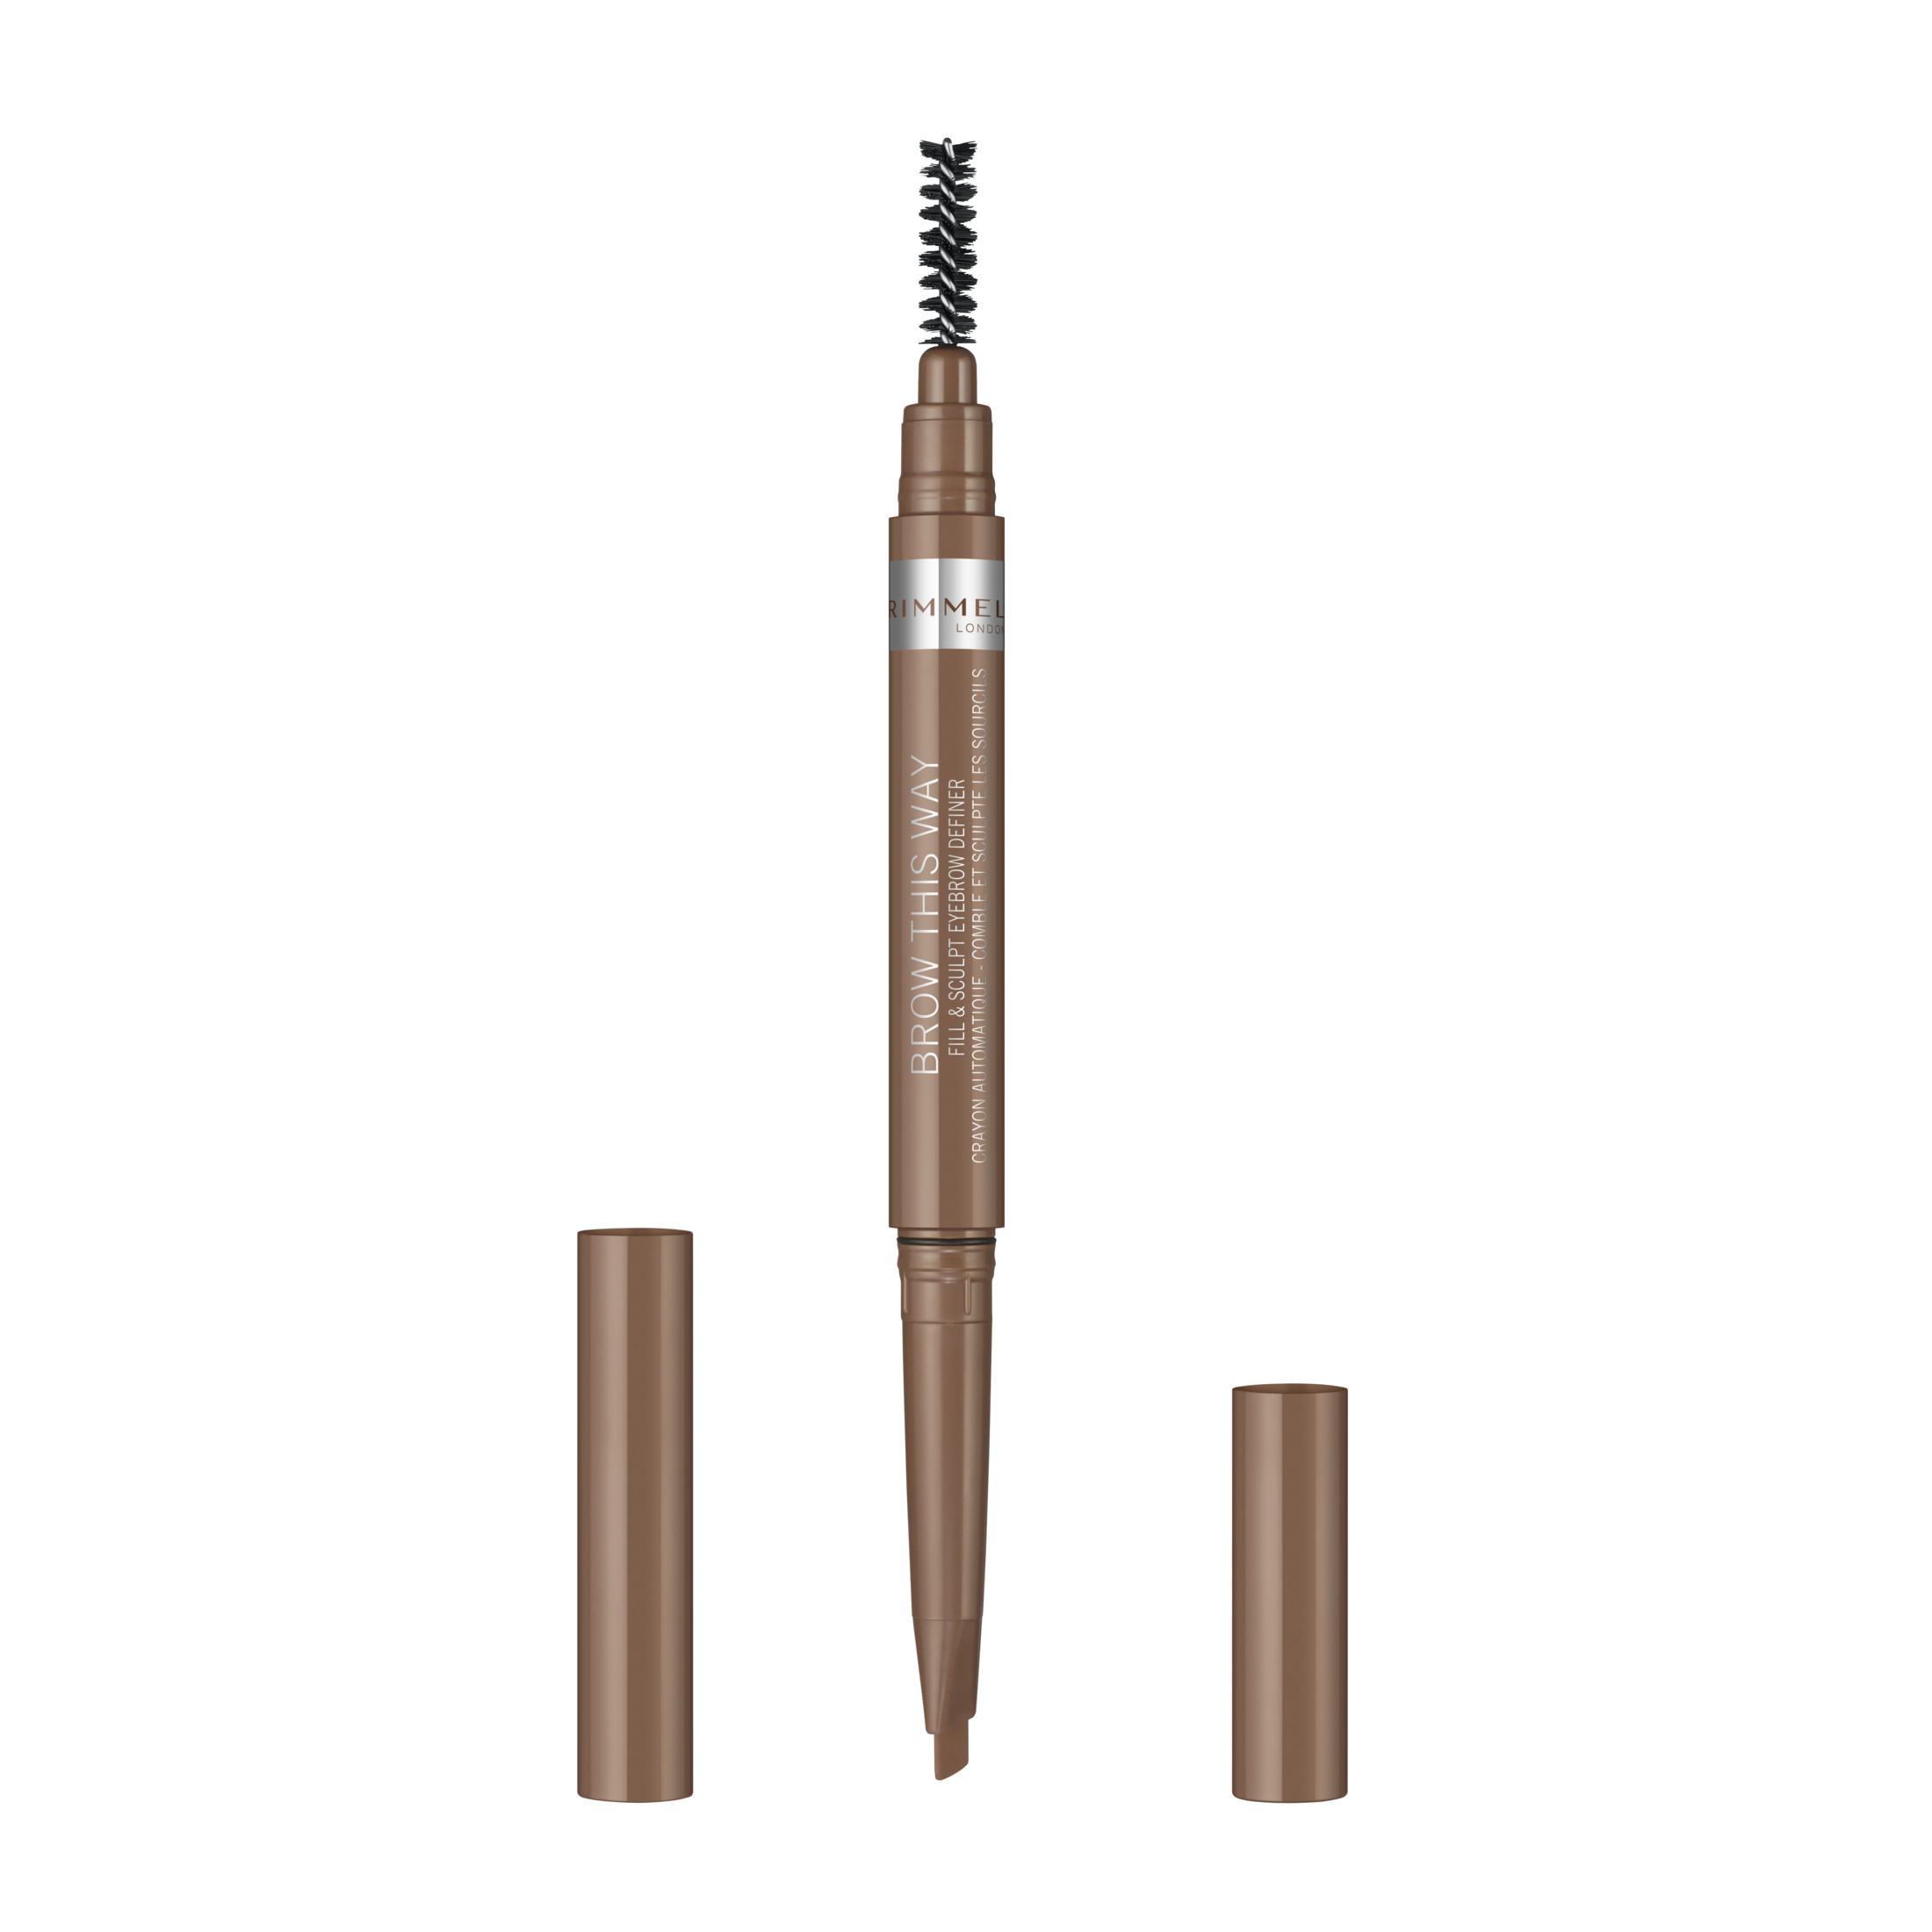 Rimmel London Brow This Way Fill & Sculpt Eyebrow Definer, Blonde, 0.01 oz - image 1 of 7